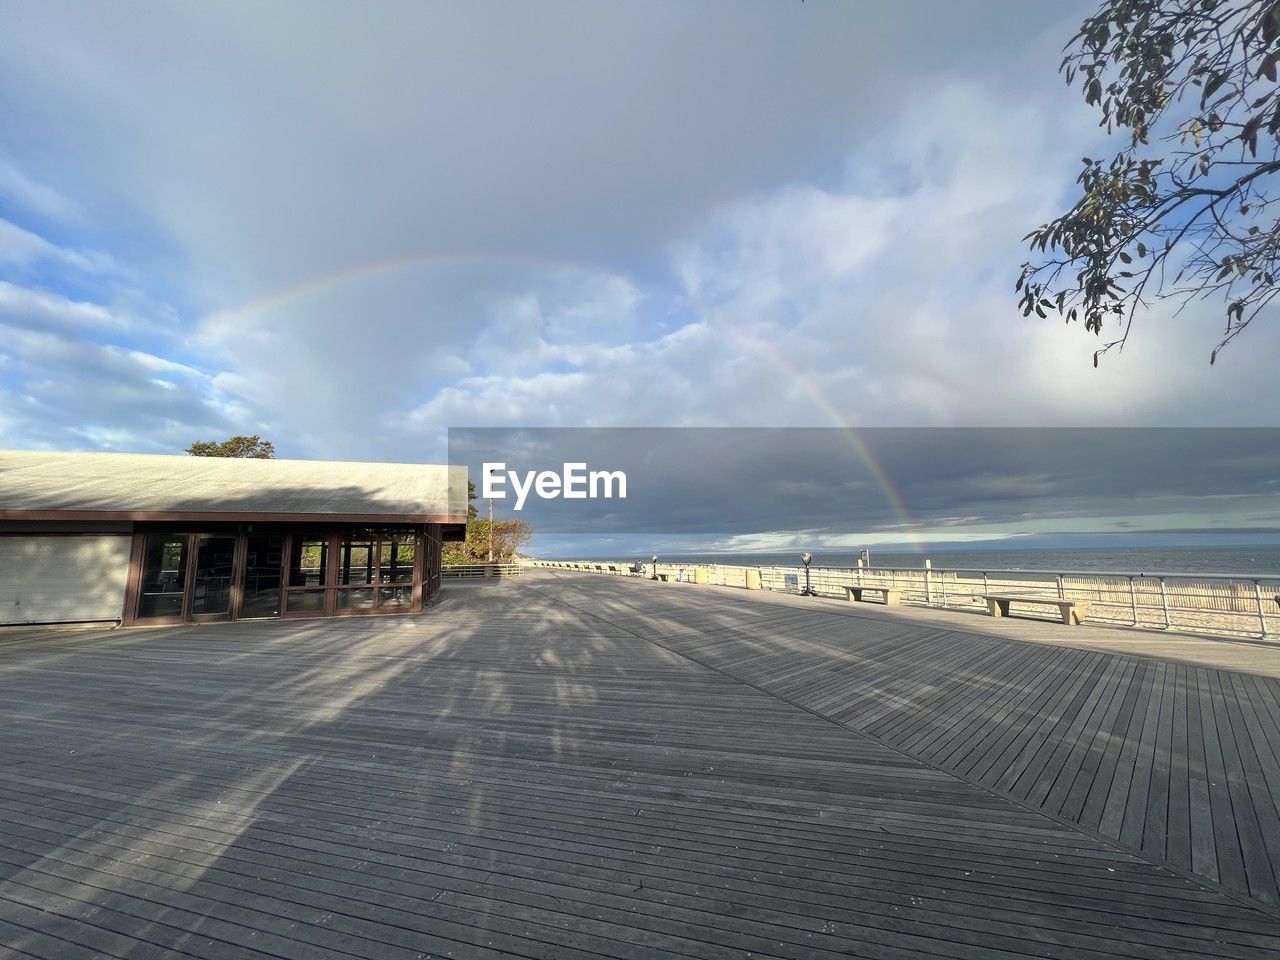 sky, rainbow, cloud, sunlight, horizon, architecture, nature, environment, built structure, water, beauty in nature, sea, scenics - nature, no people, morning, day, outdoors, boardwalk, landscape, building exterior, land, tranquility, transportation, coast, building, pier, travel, reflection, travel destinations, footpath, tranquil scene